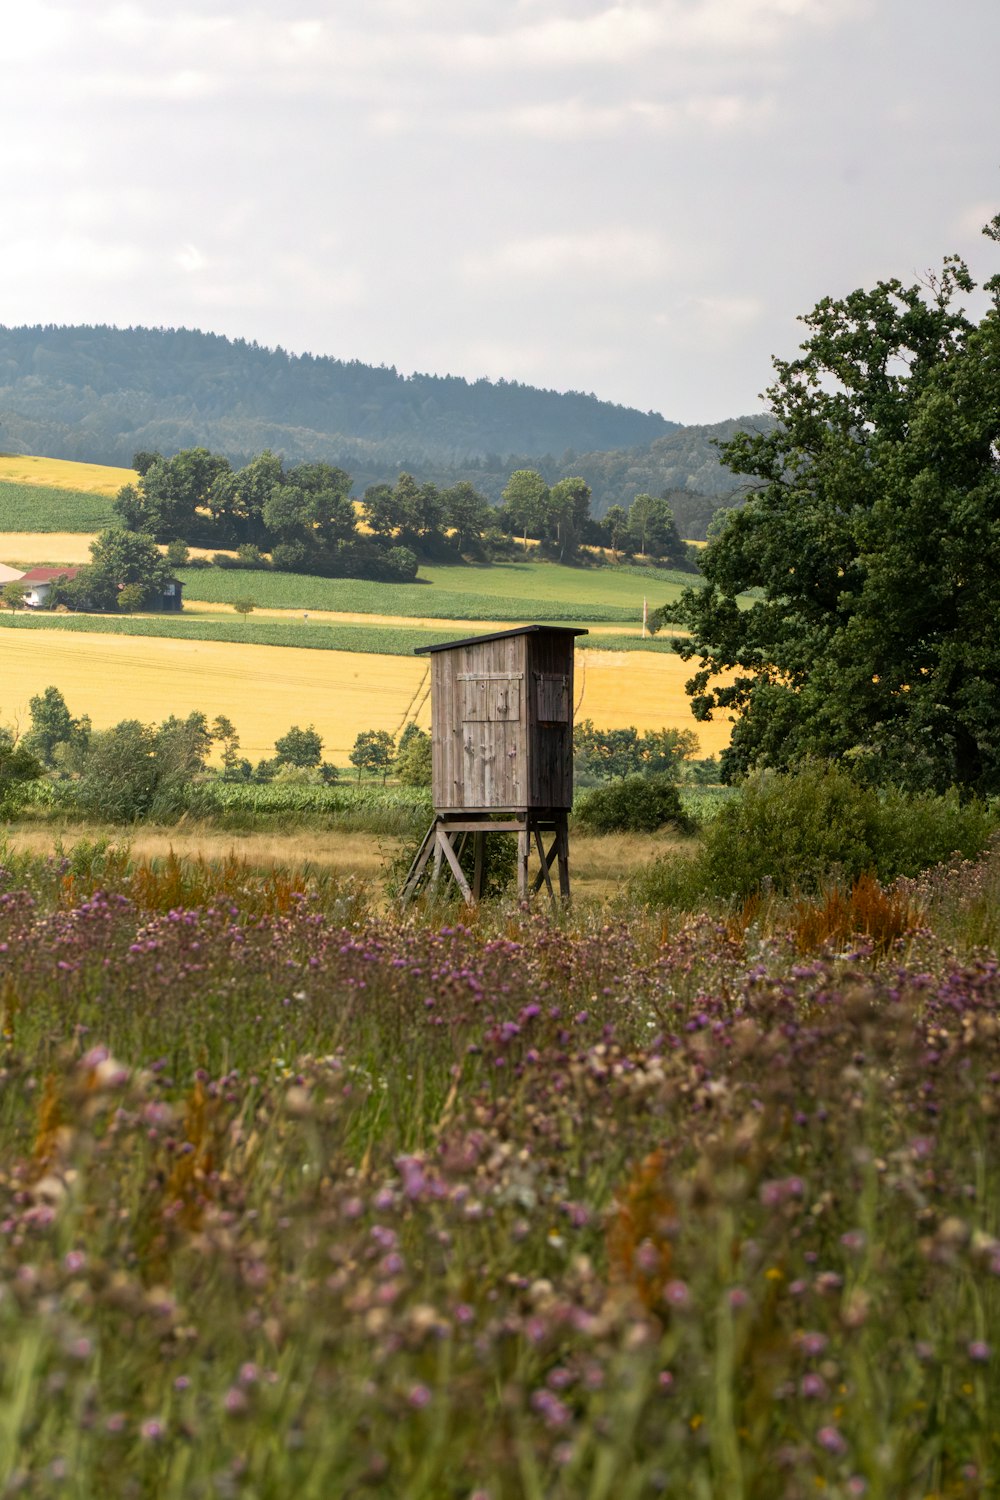 a wooden outhouse in a field of wildflowers